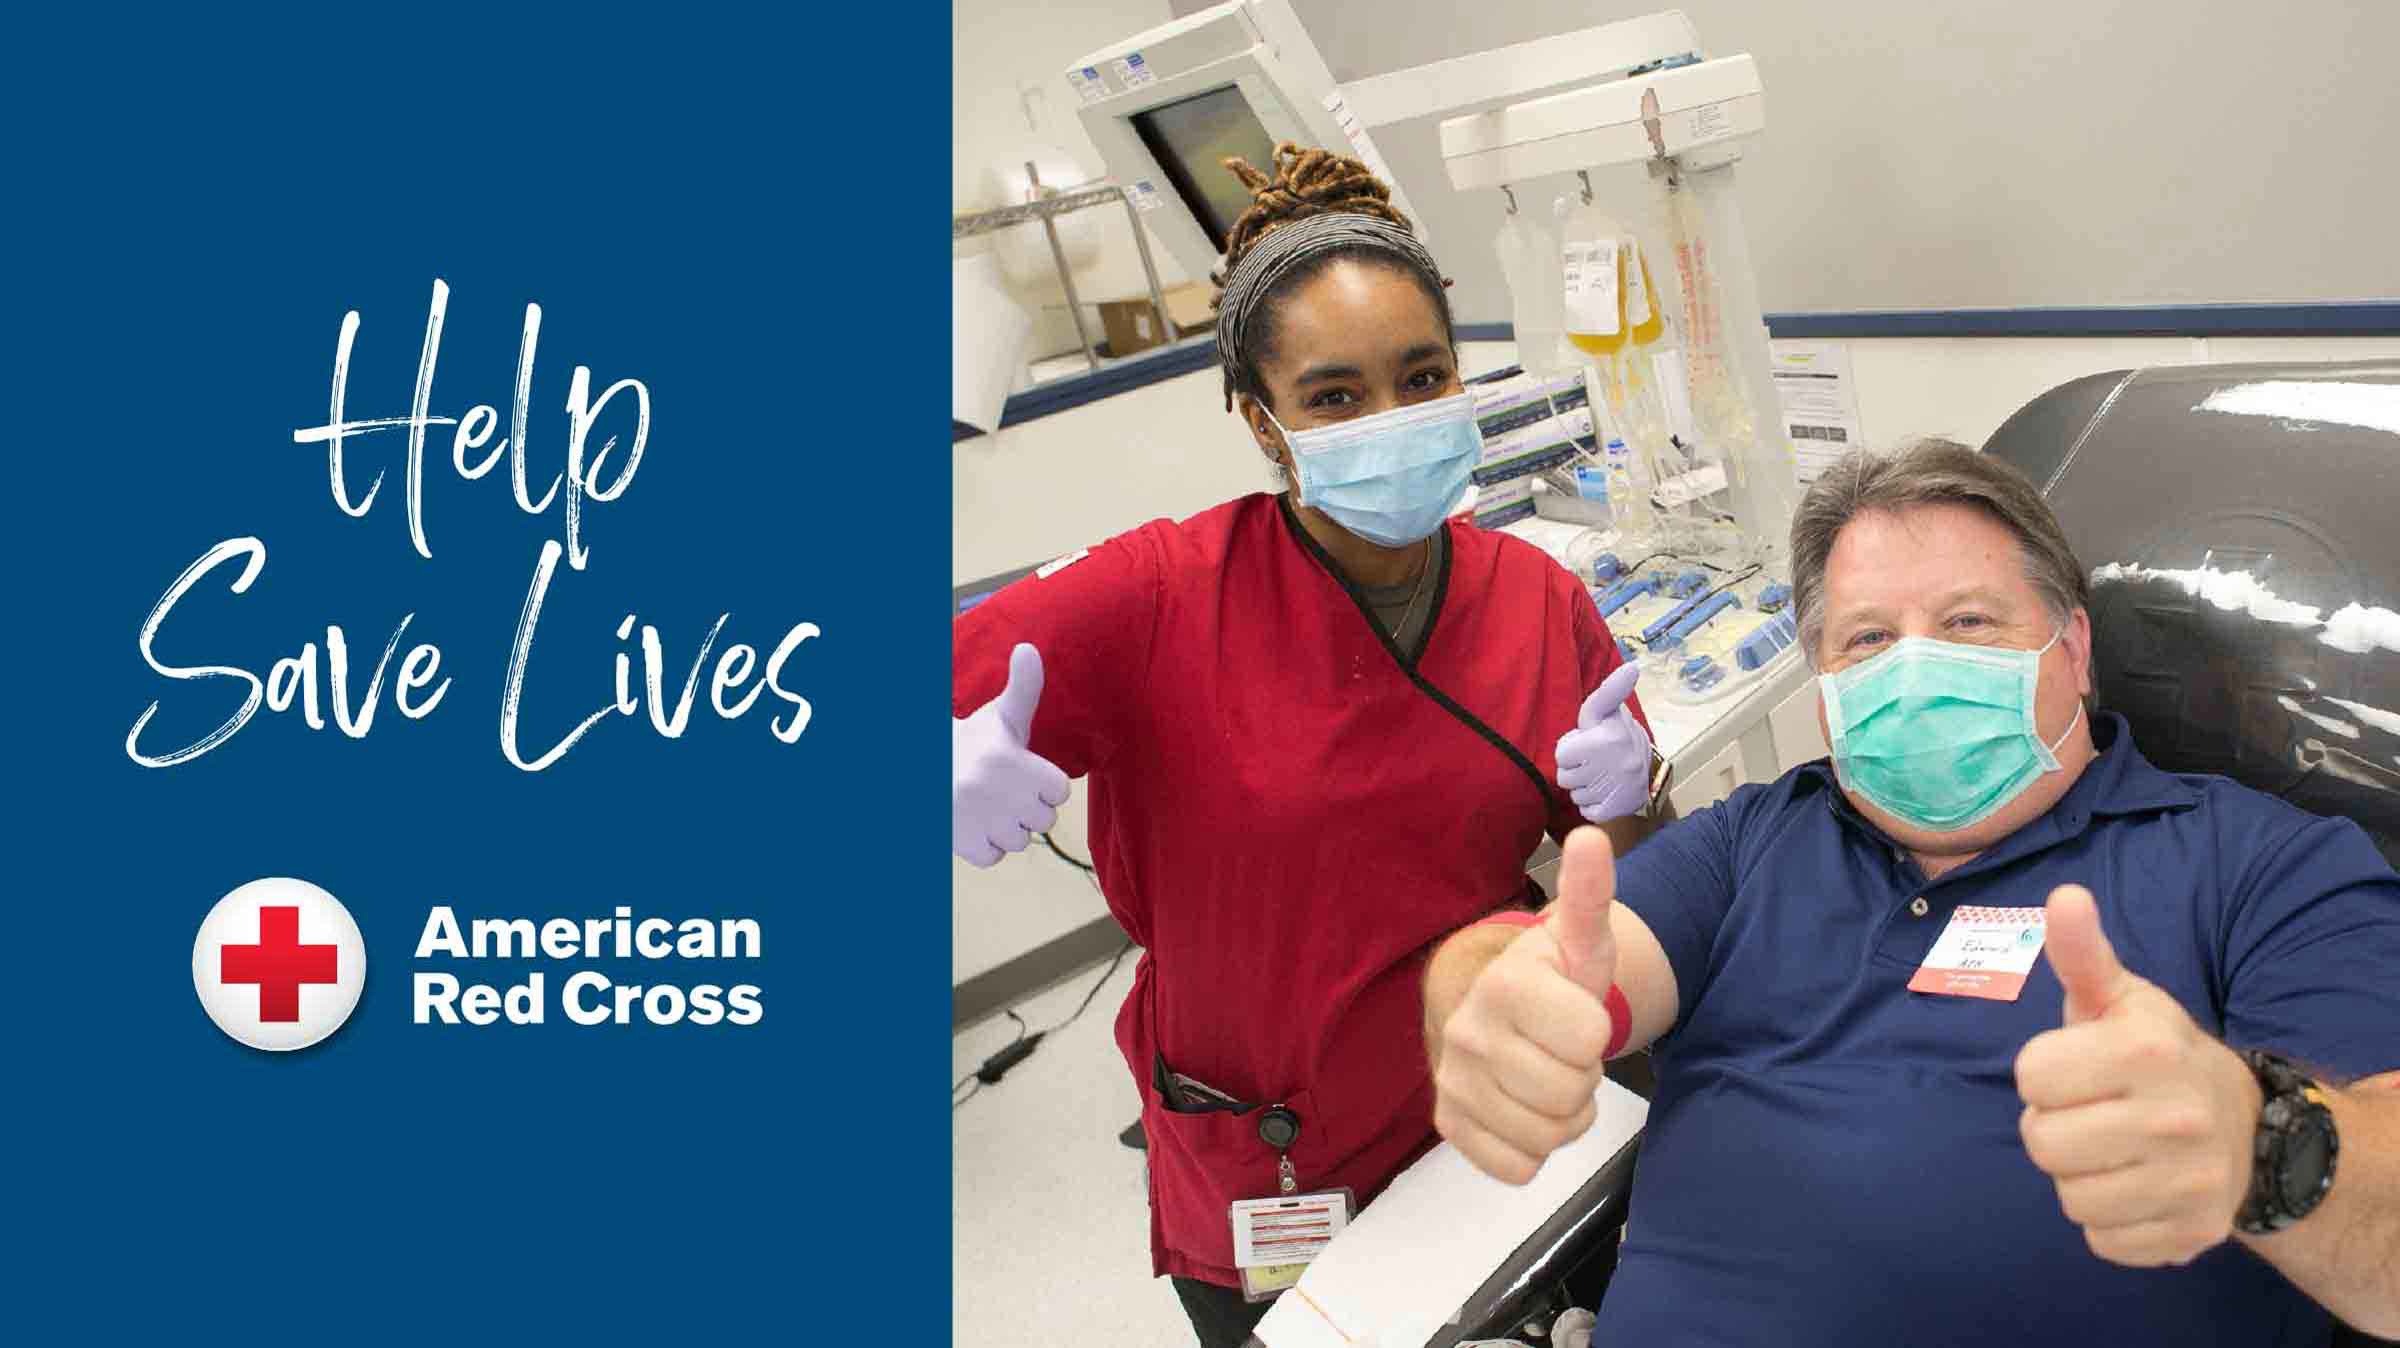 American Red Cross - Help Save Lives